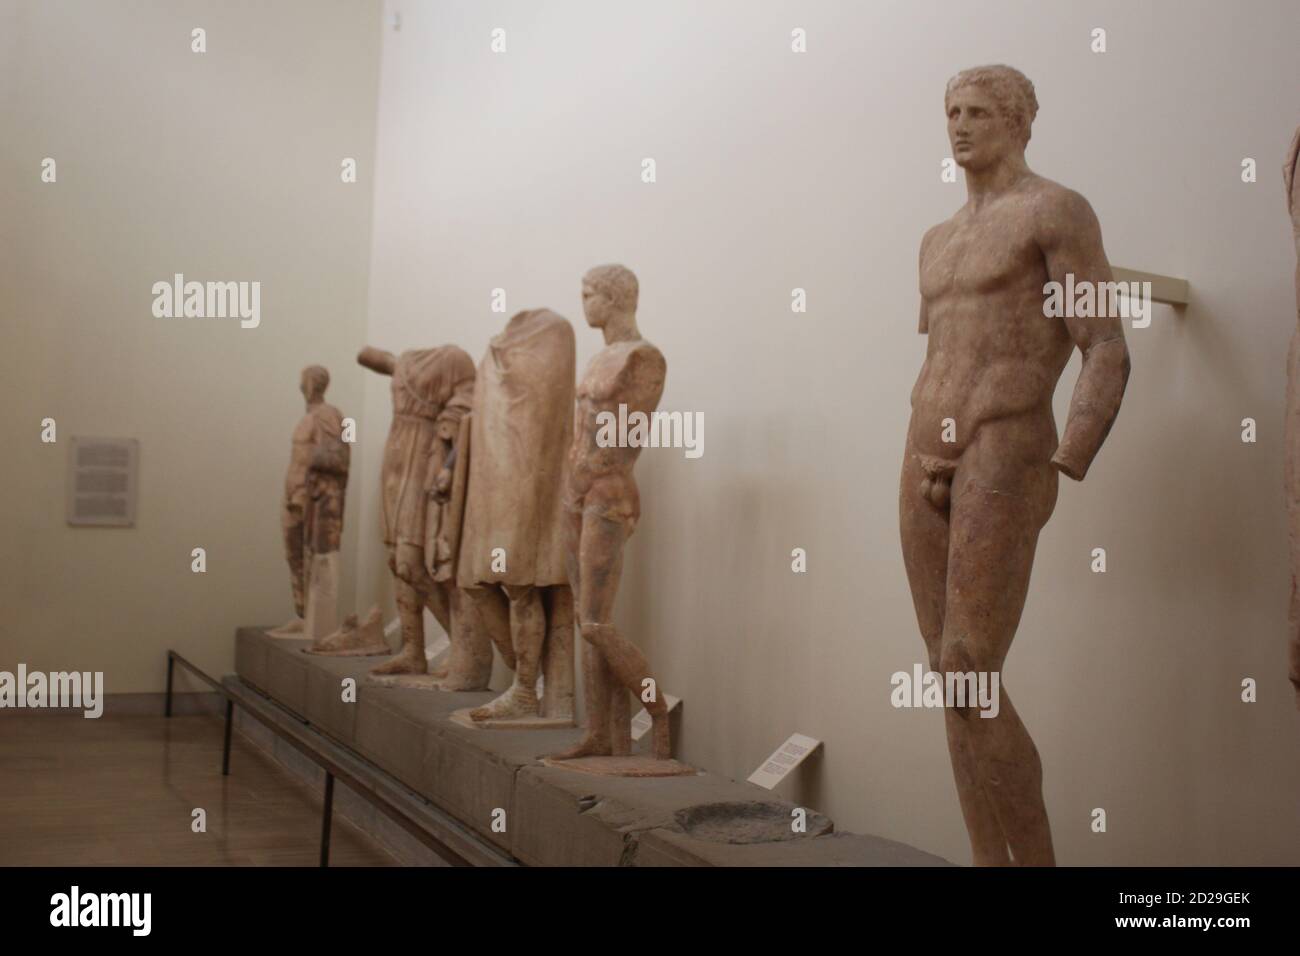 Dedication of Daochos, Hellenistic era statues on the Archeological museum of Delphi in Greece Stock Photo